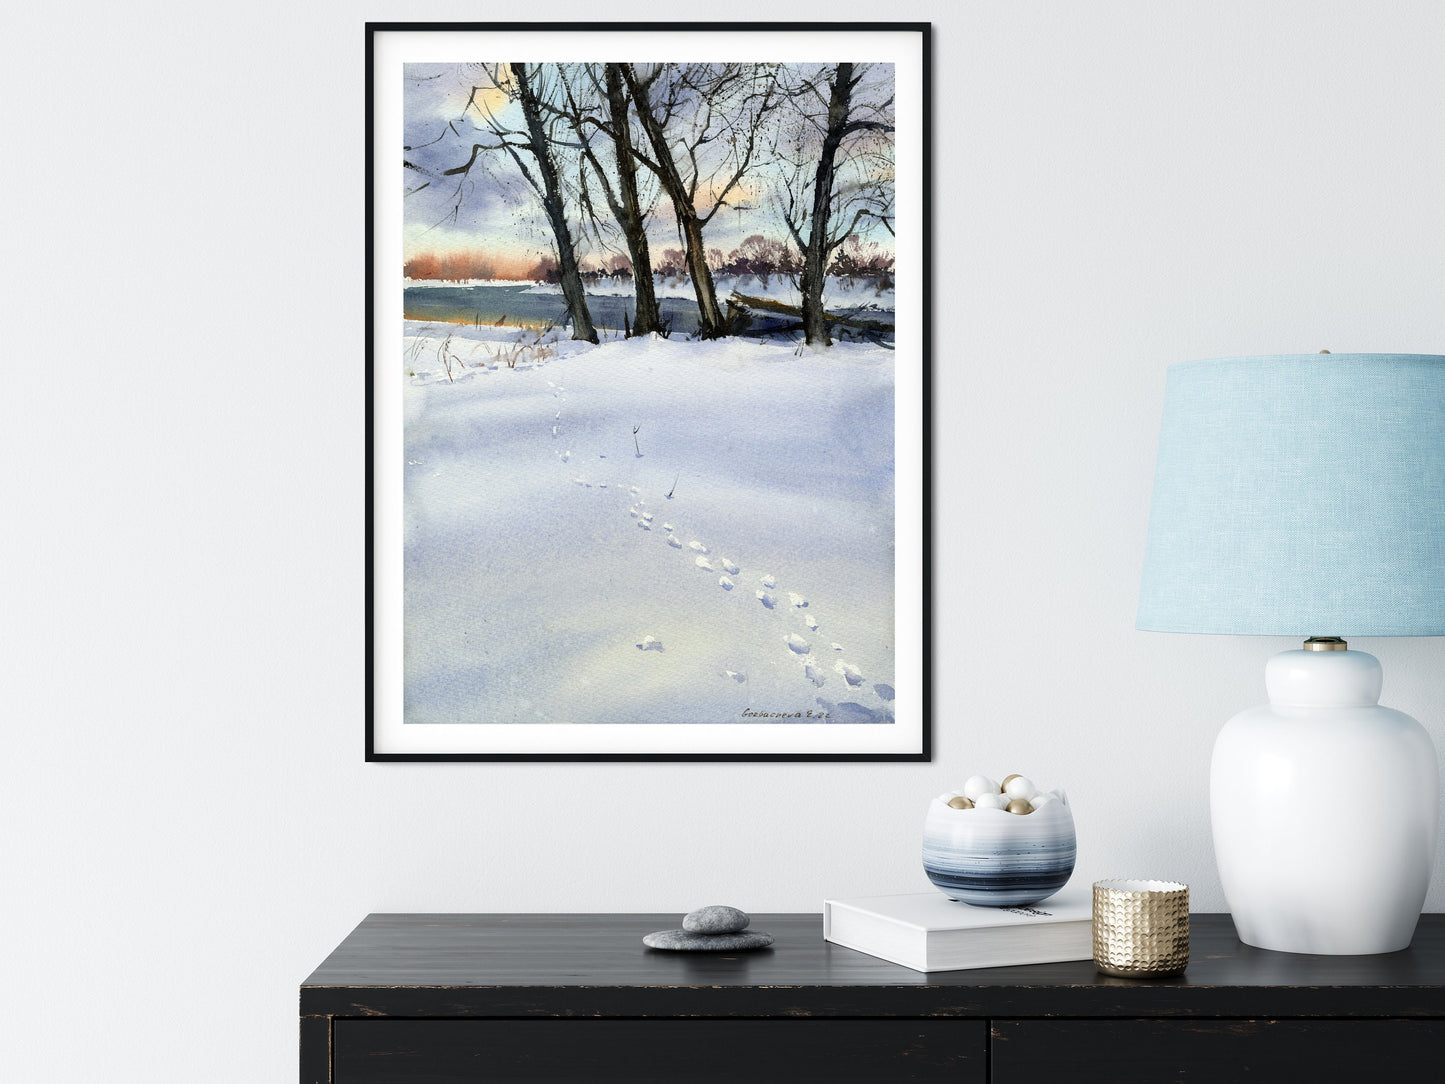 Winter Forest Art Print, Watercolor Landscape Painting, House Wall Decor, Canvas Print, Snowy Field Trees, Night Sky, Gift for Home